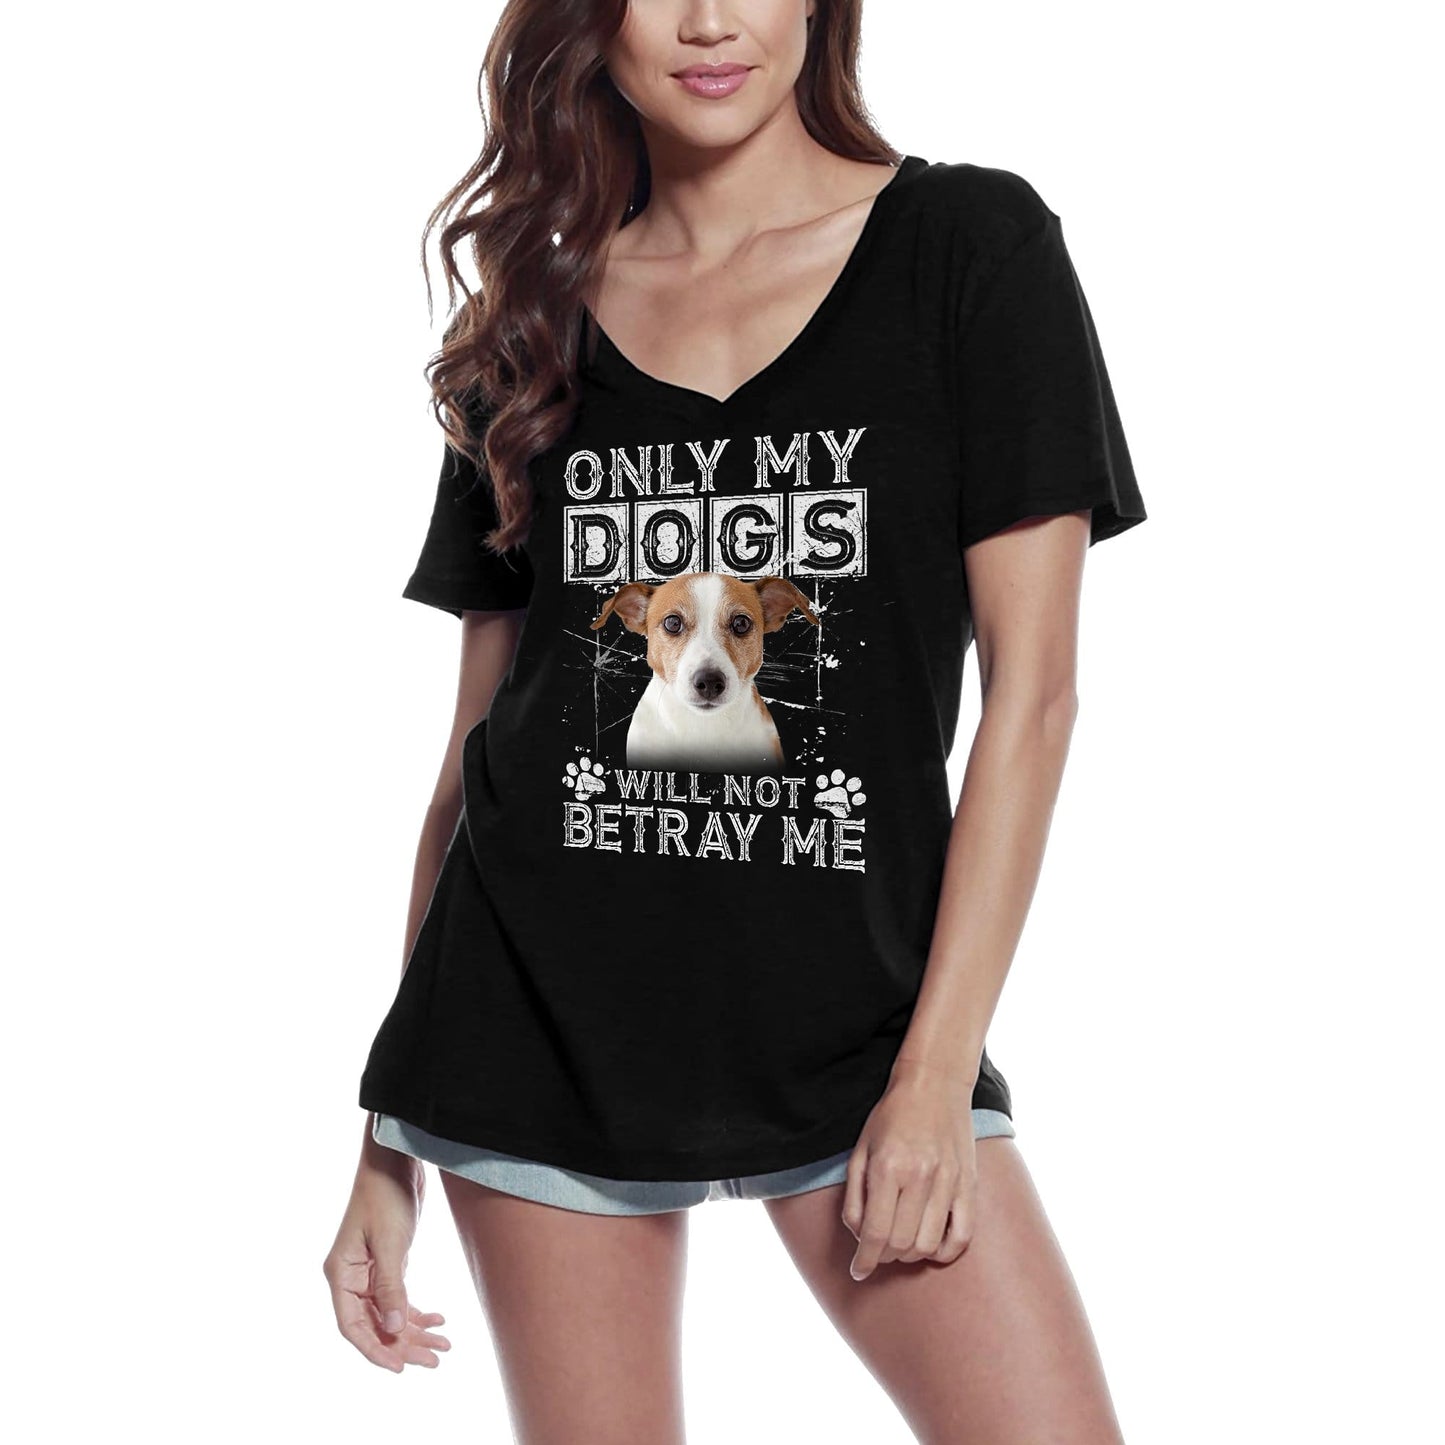 ULTRABASIC Women's T-Shirt Only My Dogs Will Not Betray Me - Jack Russel Terrier Cute Dog Paw